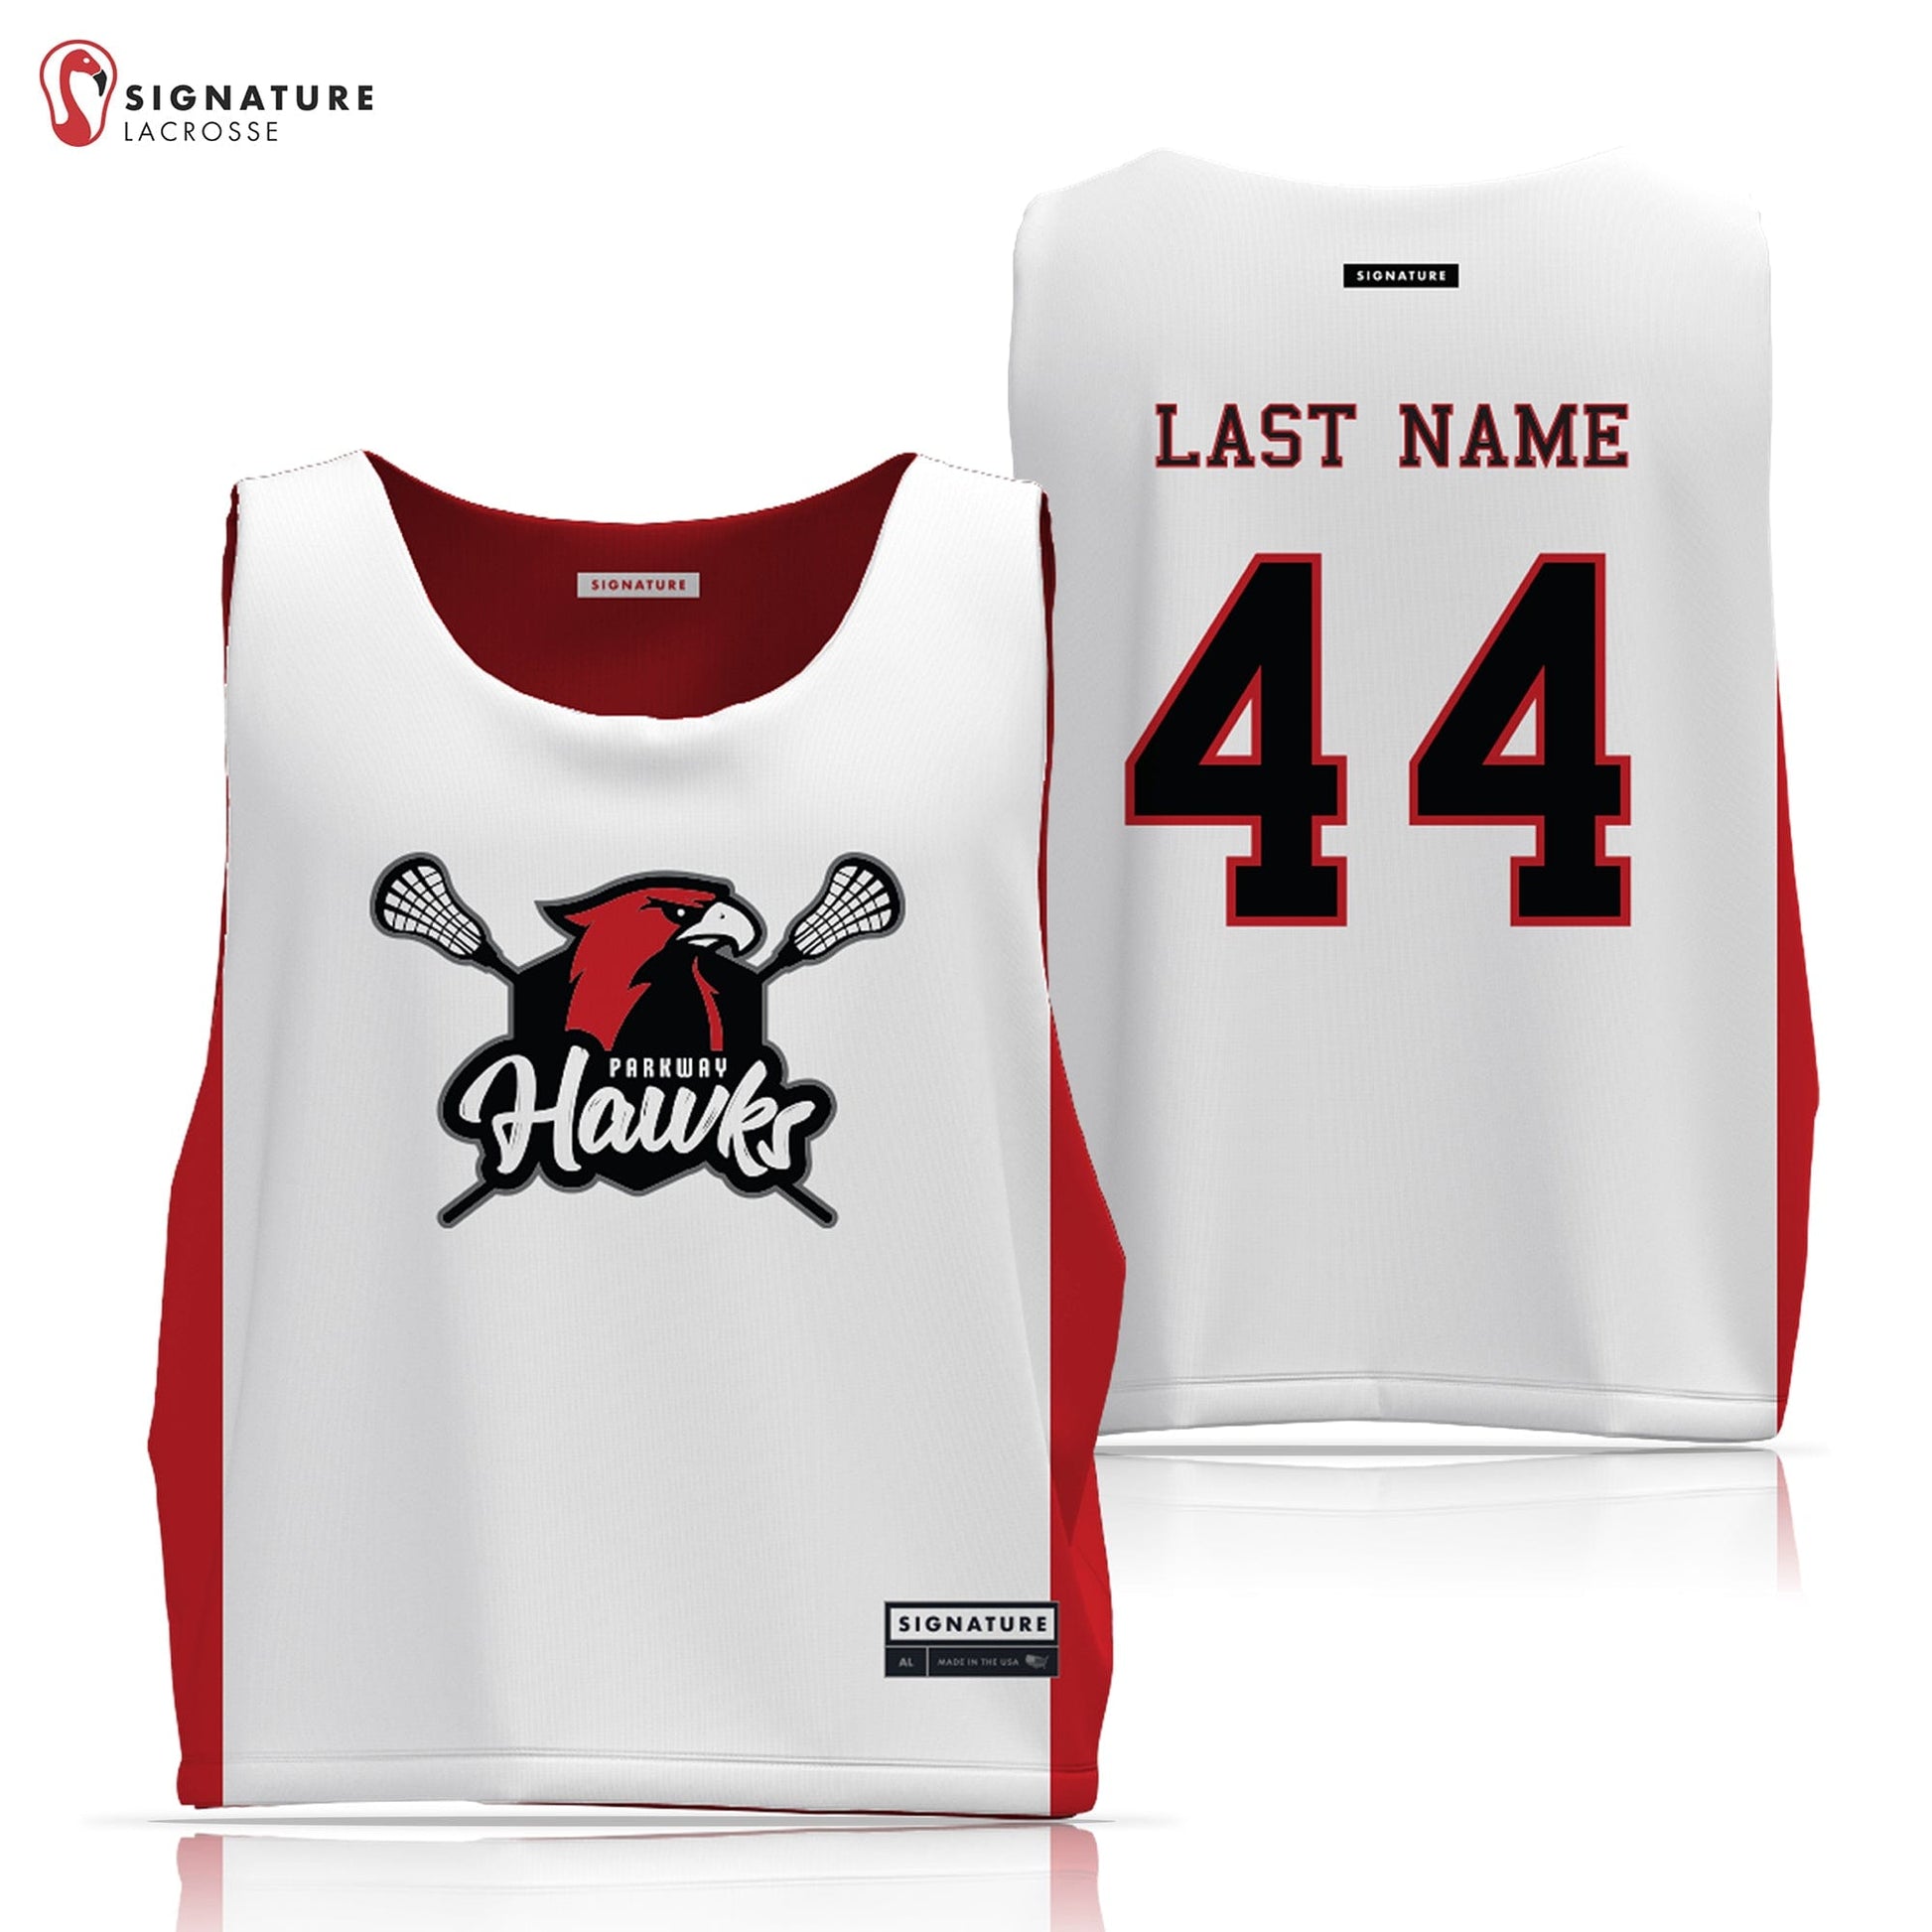 Parkway Youth Lacrosse Men's 3 Piece Game Package Signature Lacrosse